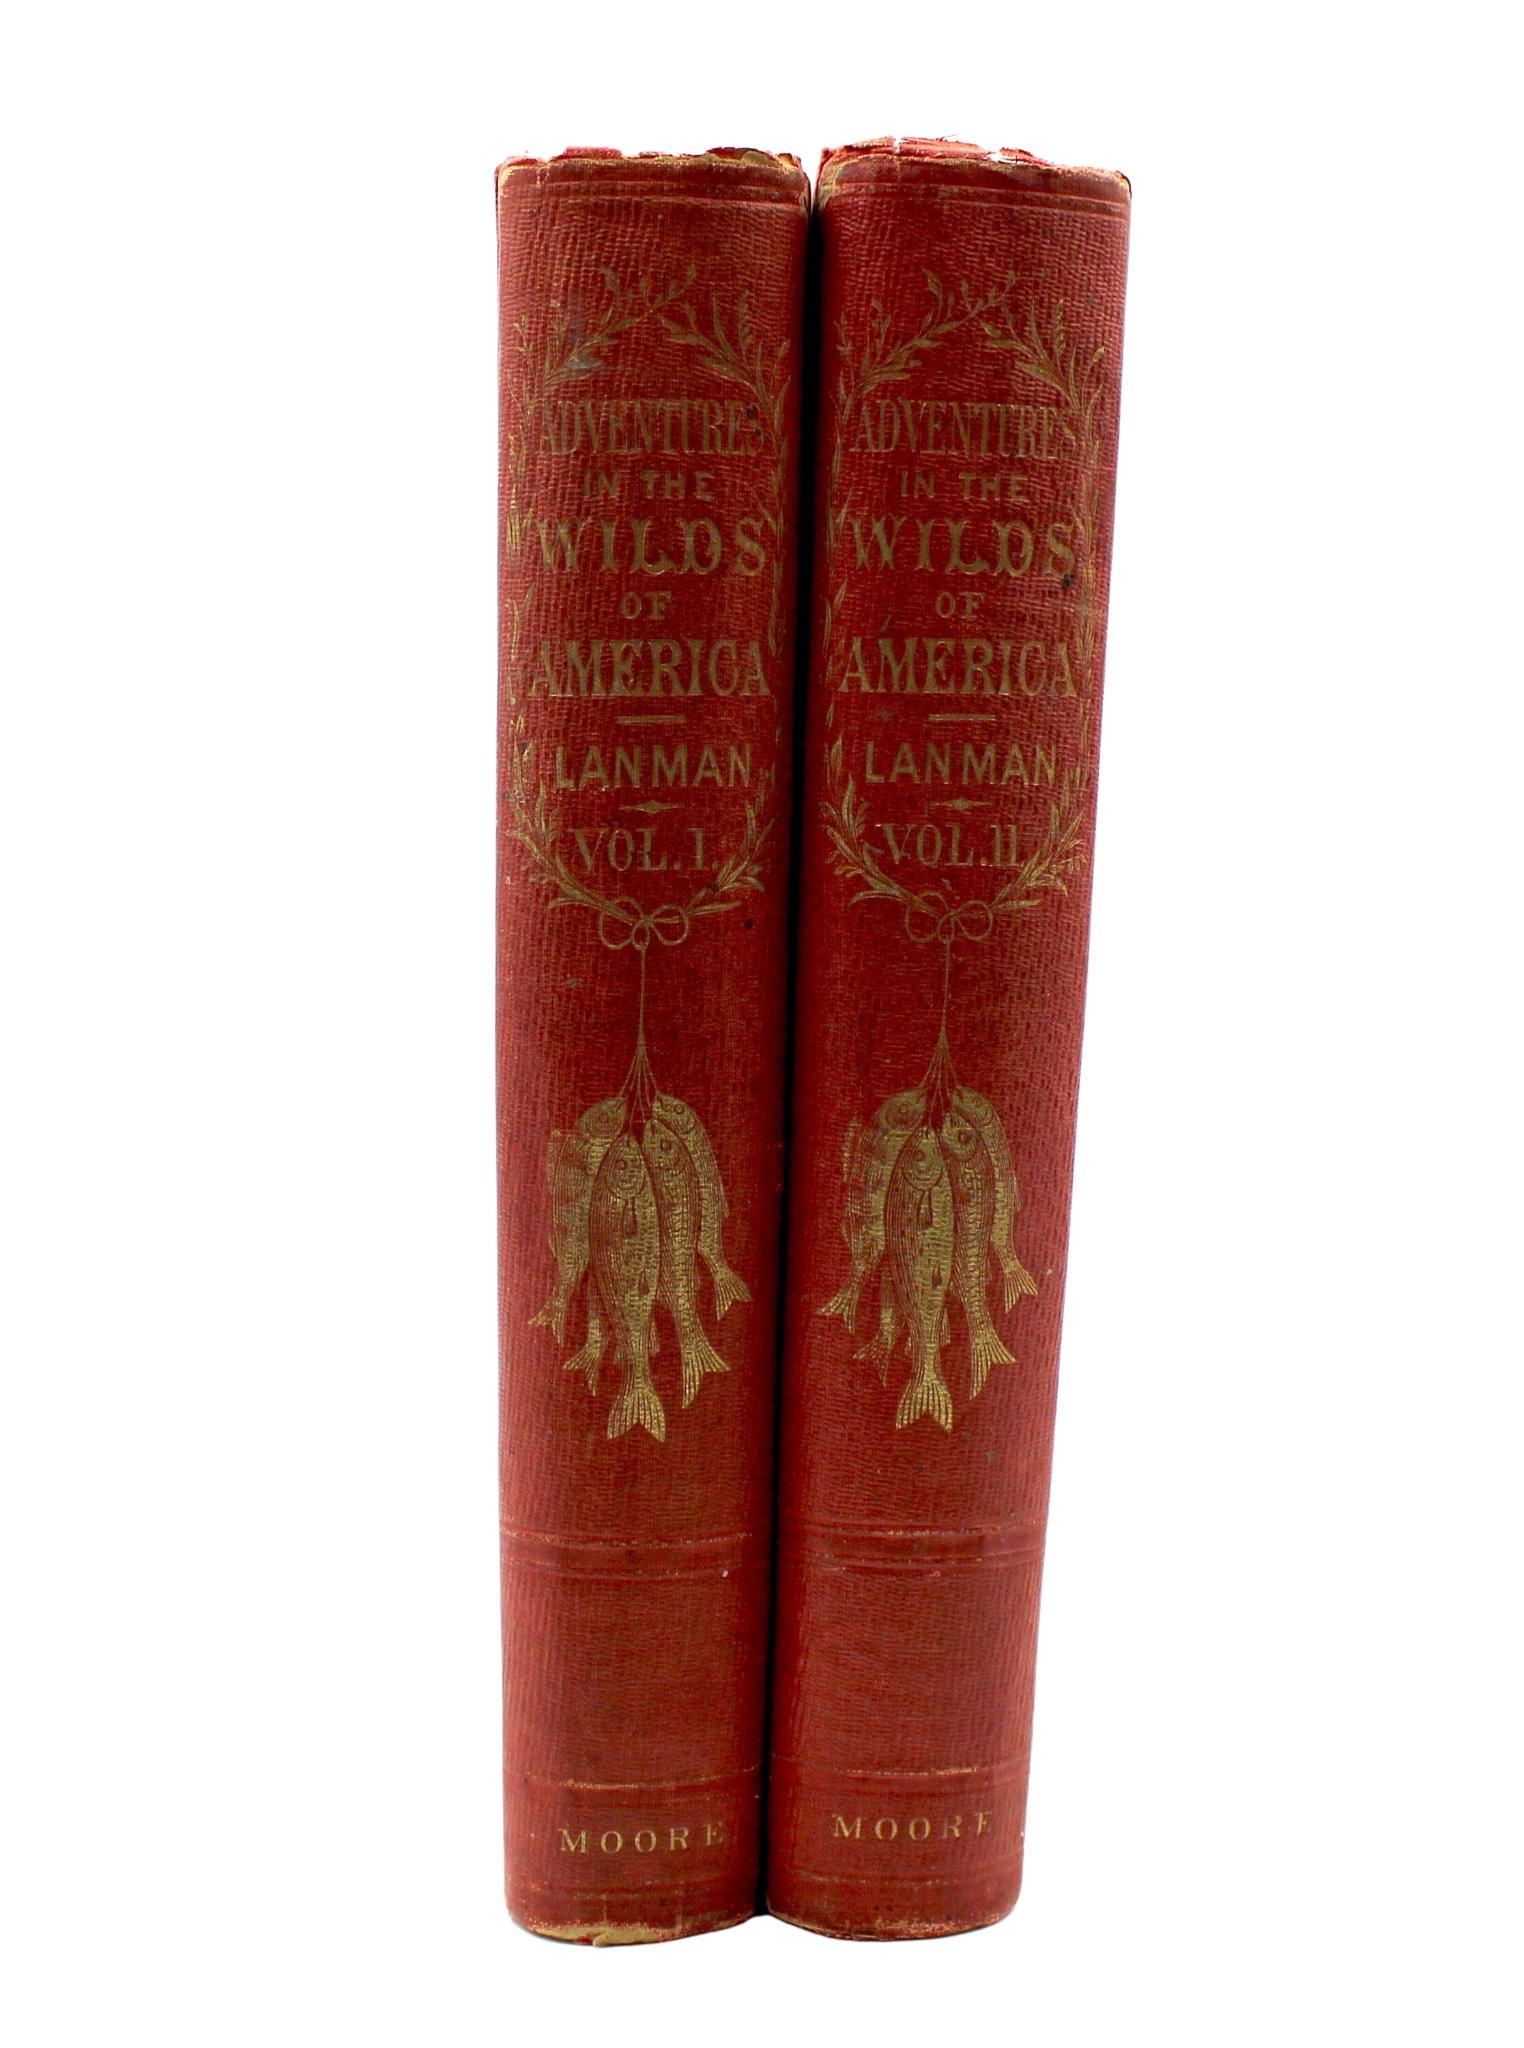 Lanman, Charles. Adventures in the Wilds of the United States and British American Provinces. Philadelphia: John W. Moore, 1856. 2 volumes, 8vo. In original red cloth pictorial gilt boards. Illustrated with ten engraved plates. With new archival red